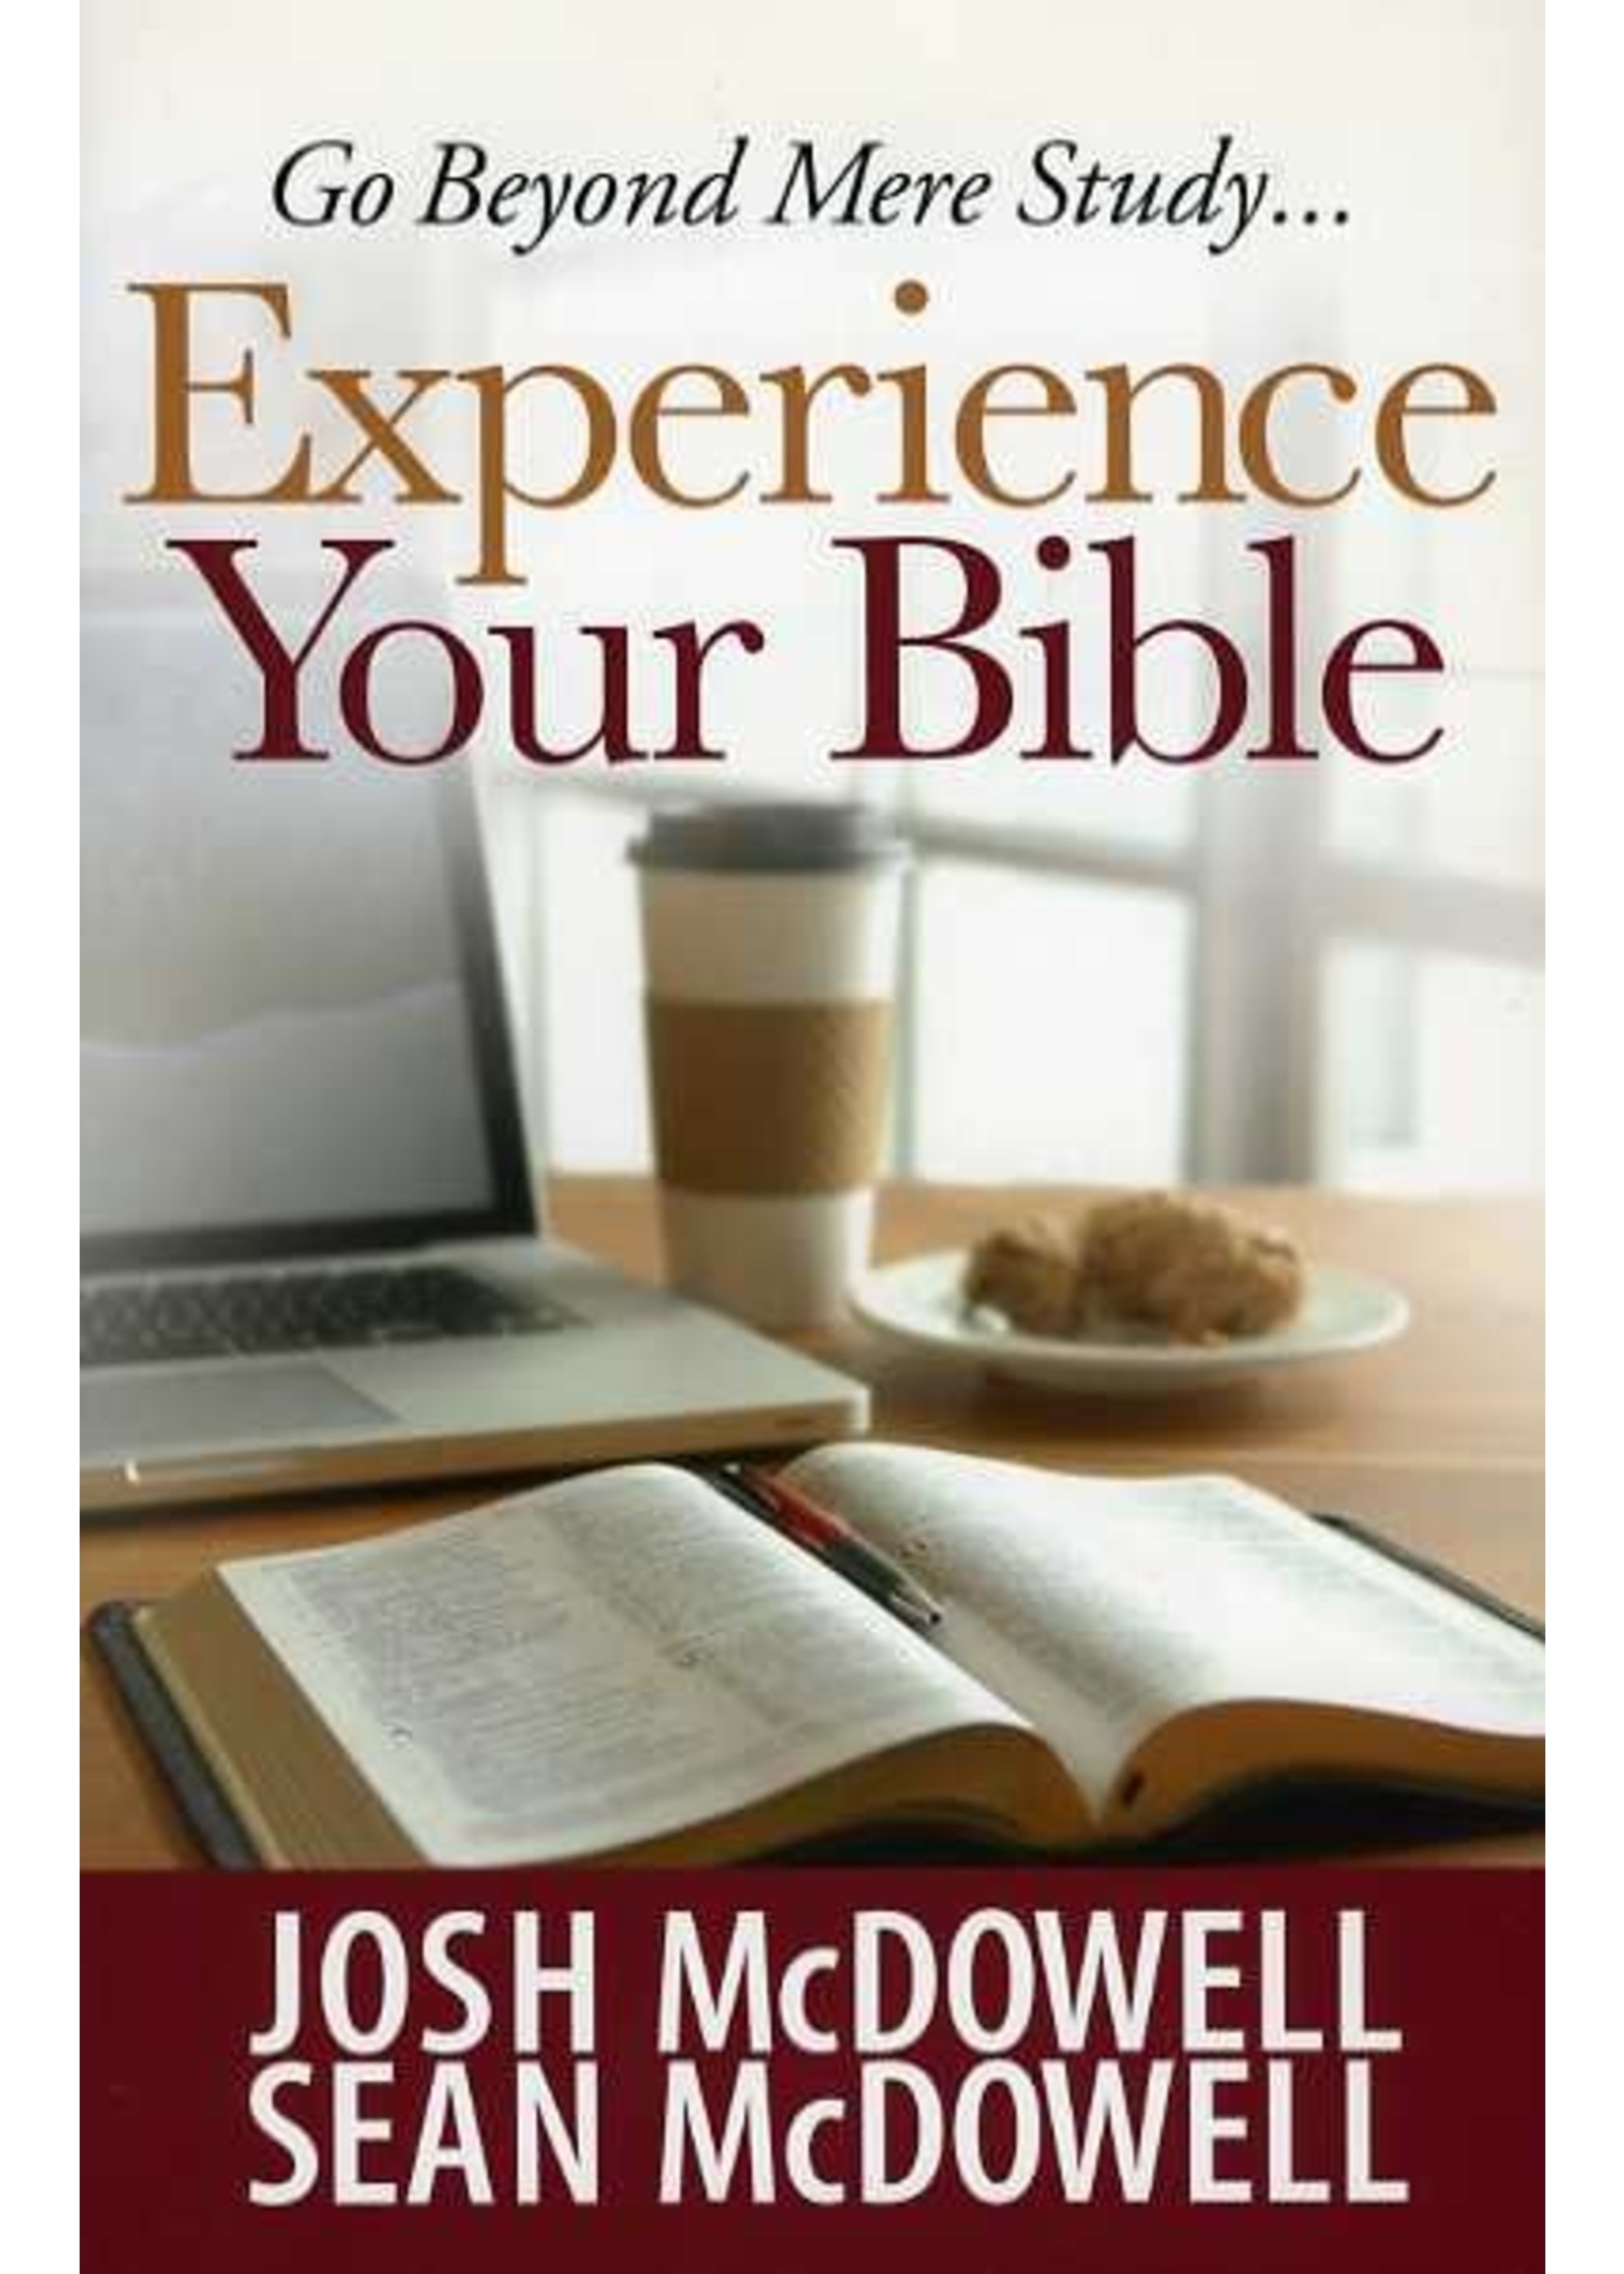 Harvest House Experience Your Bible - Josh McDowell